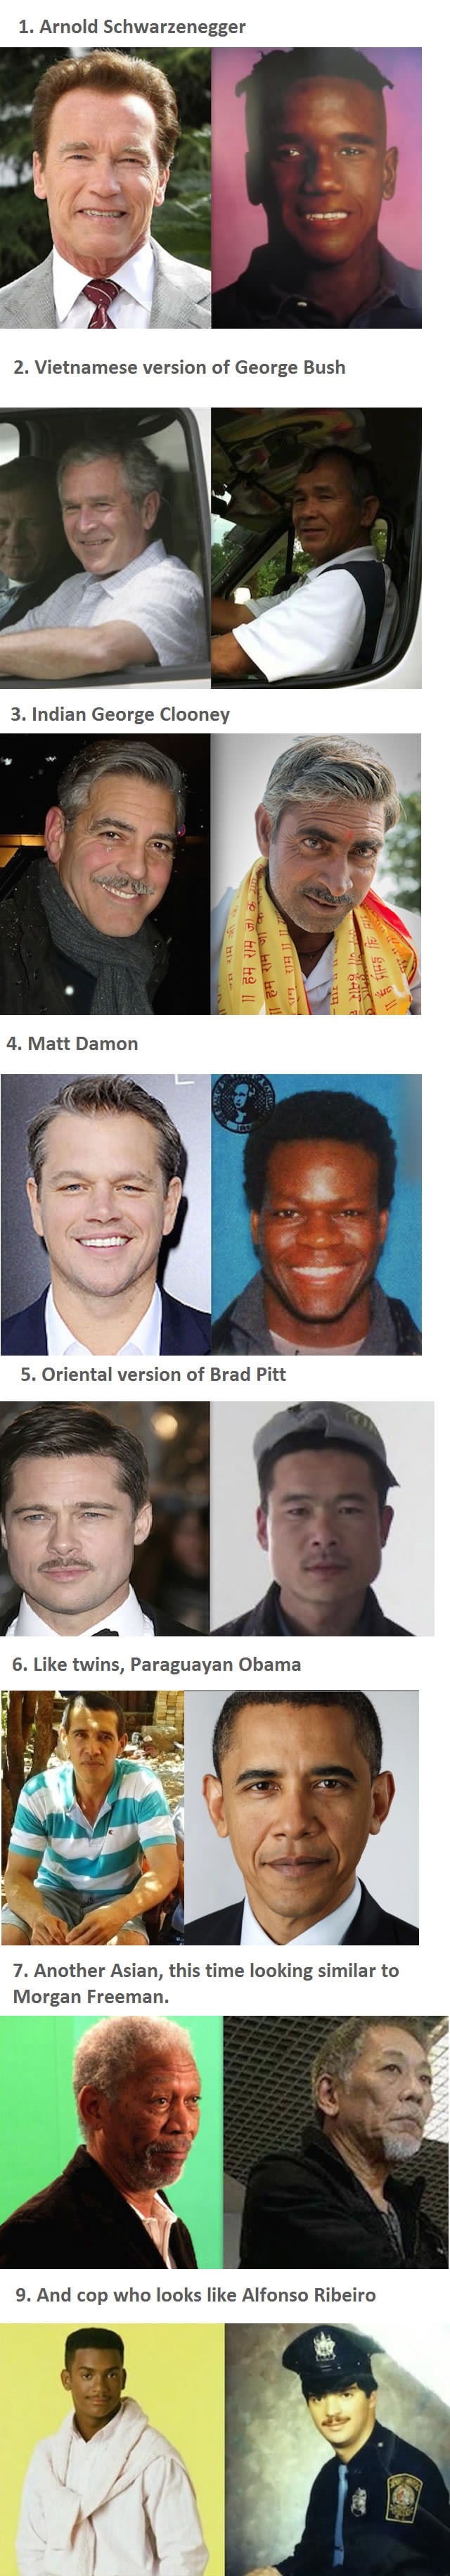 Famous people that have look-alikes from other races